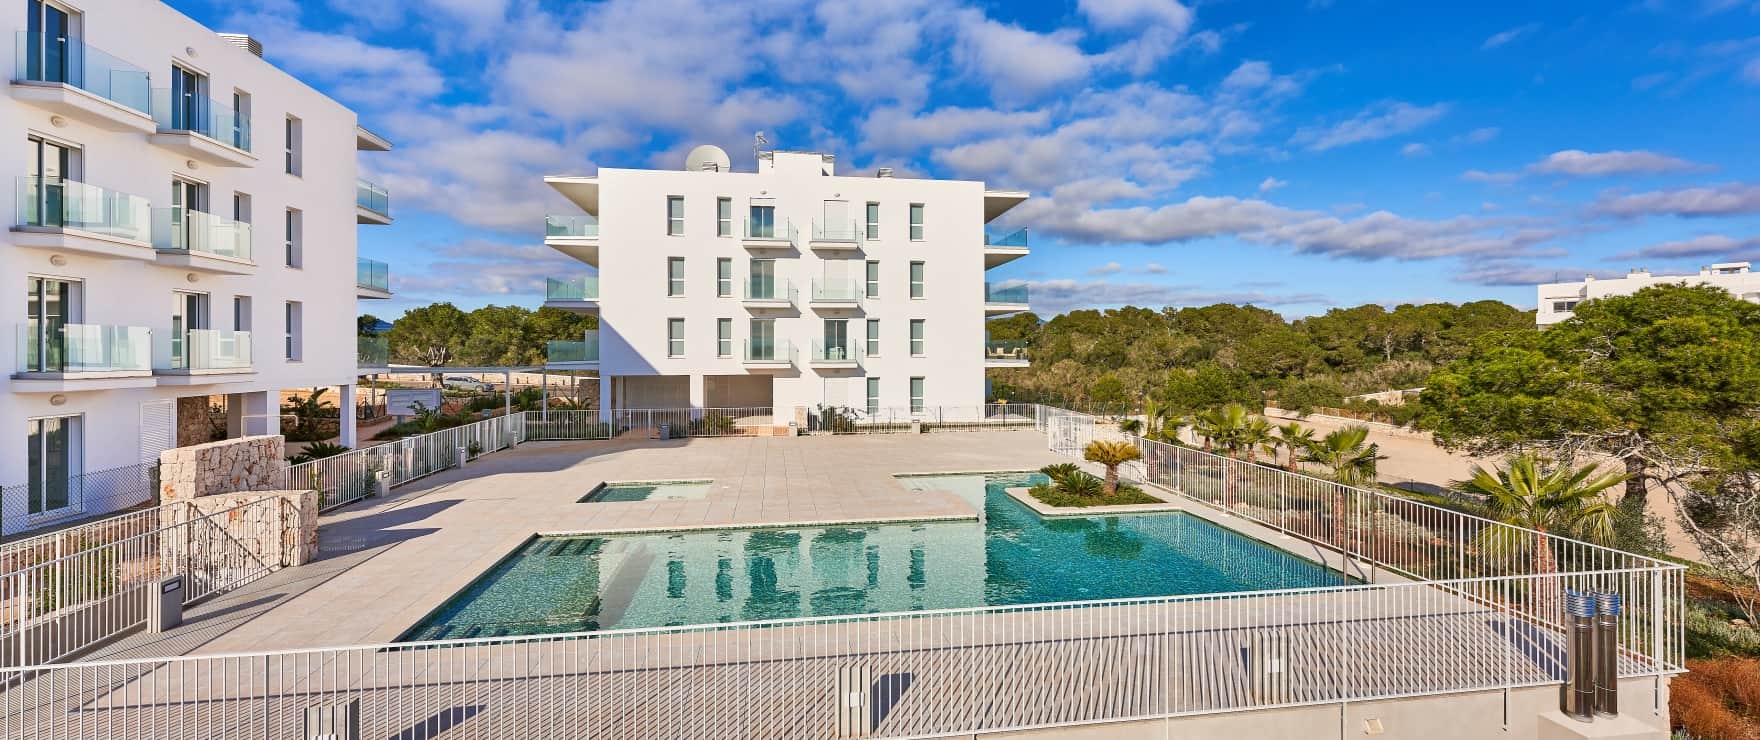 Compass, Cala d'Or, Majorca: New 2-bed apartments for sale